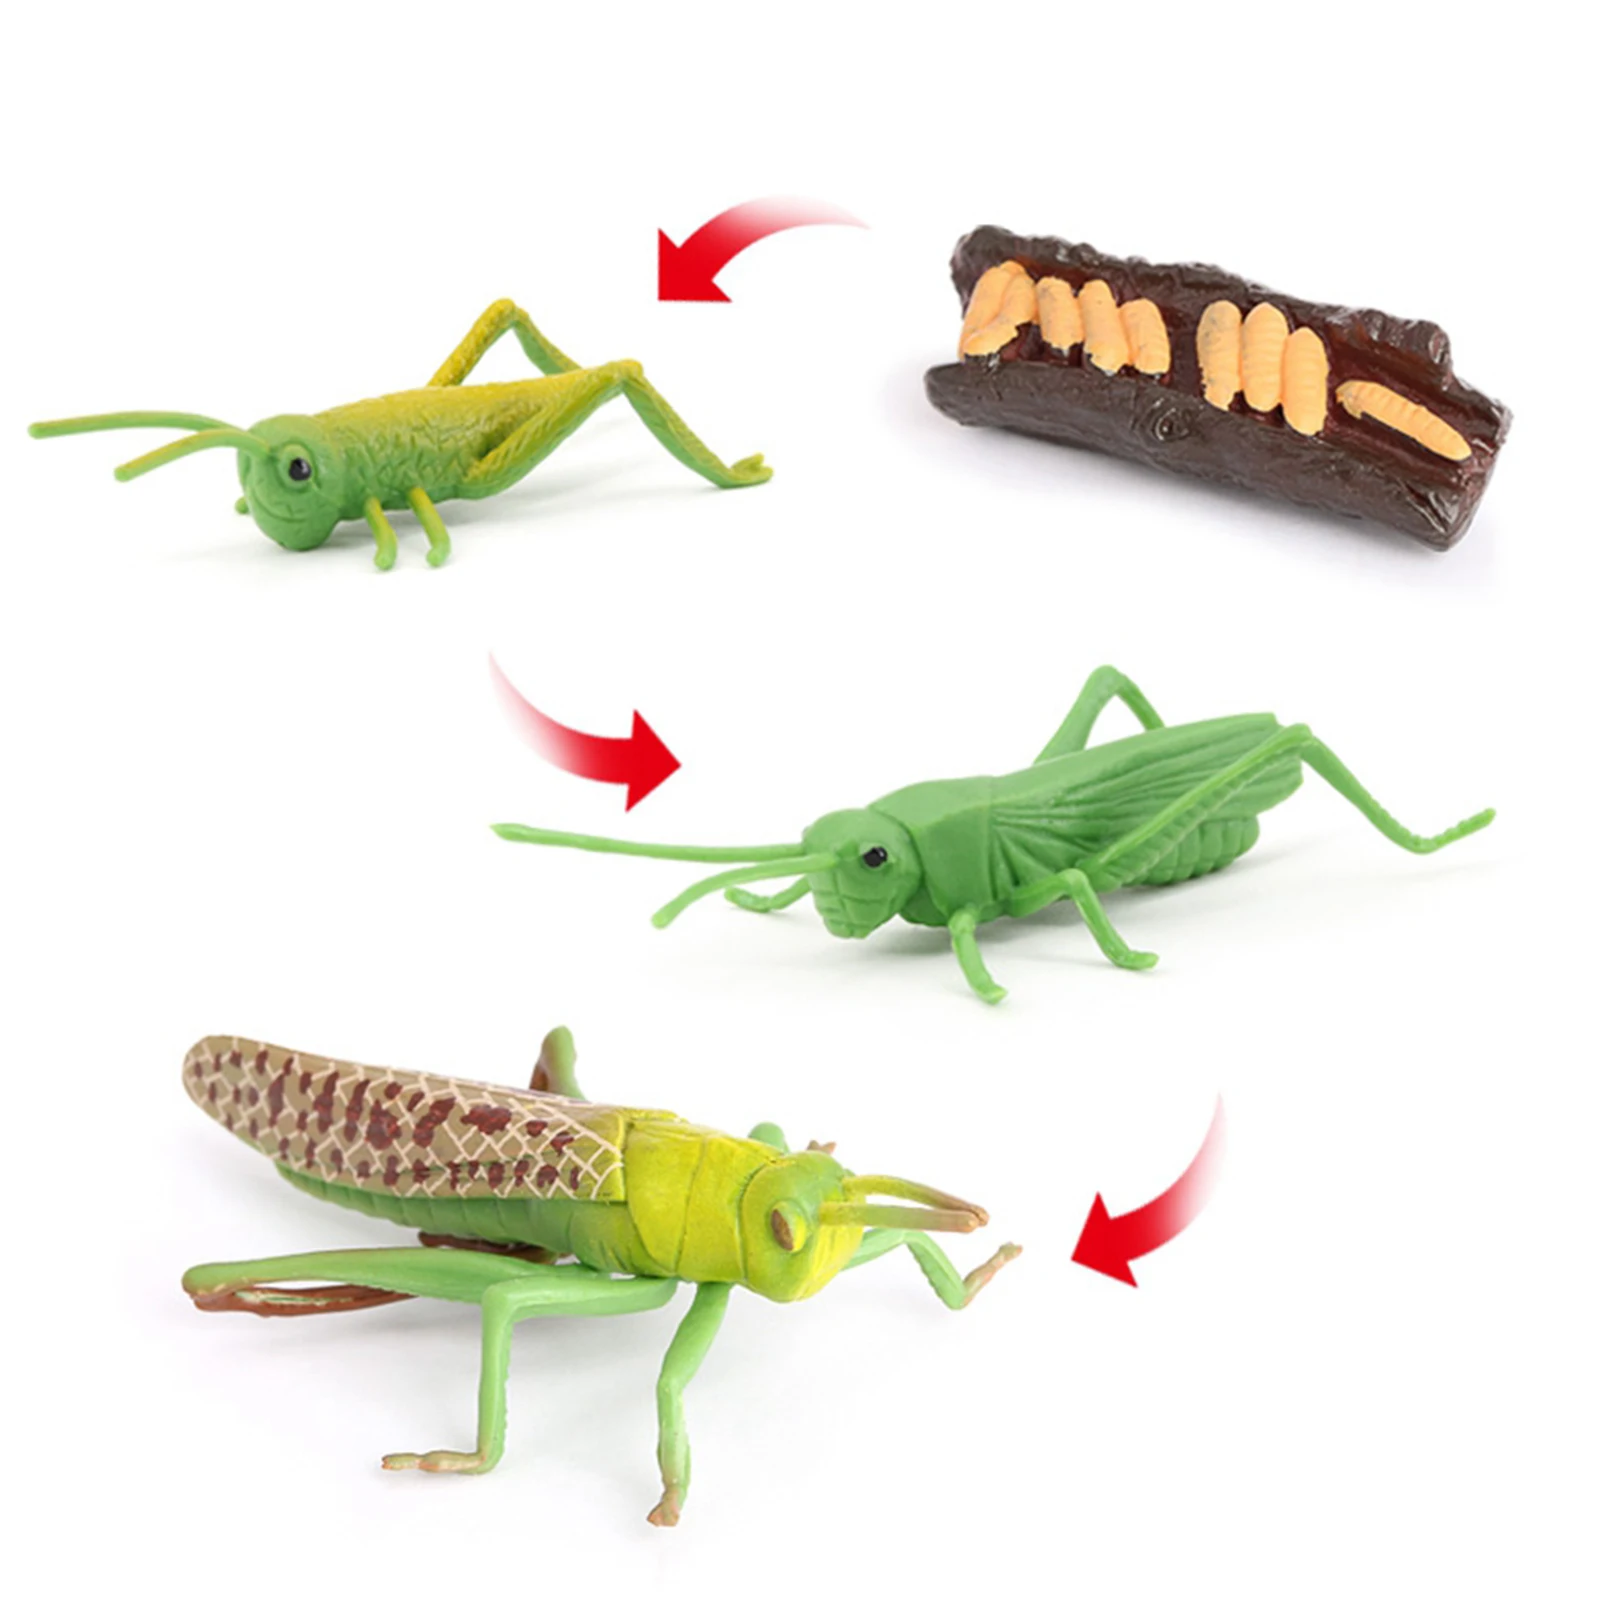 Plastic Simulation Nature Grasshopper Growth Figure Playset Education Imagination Biology Toys Teaching Aids Themed Party